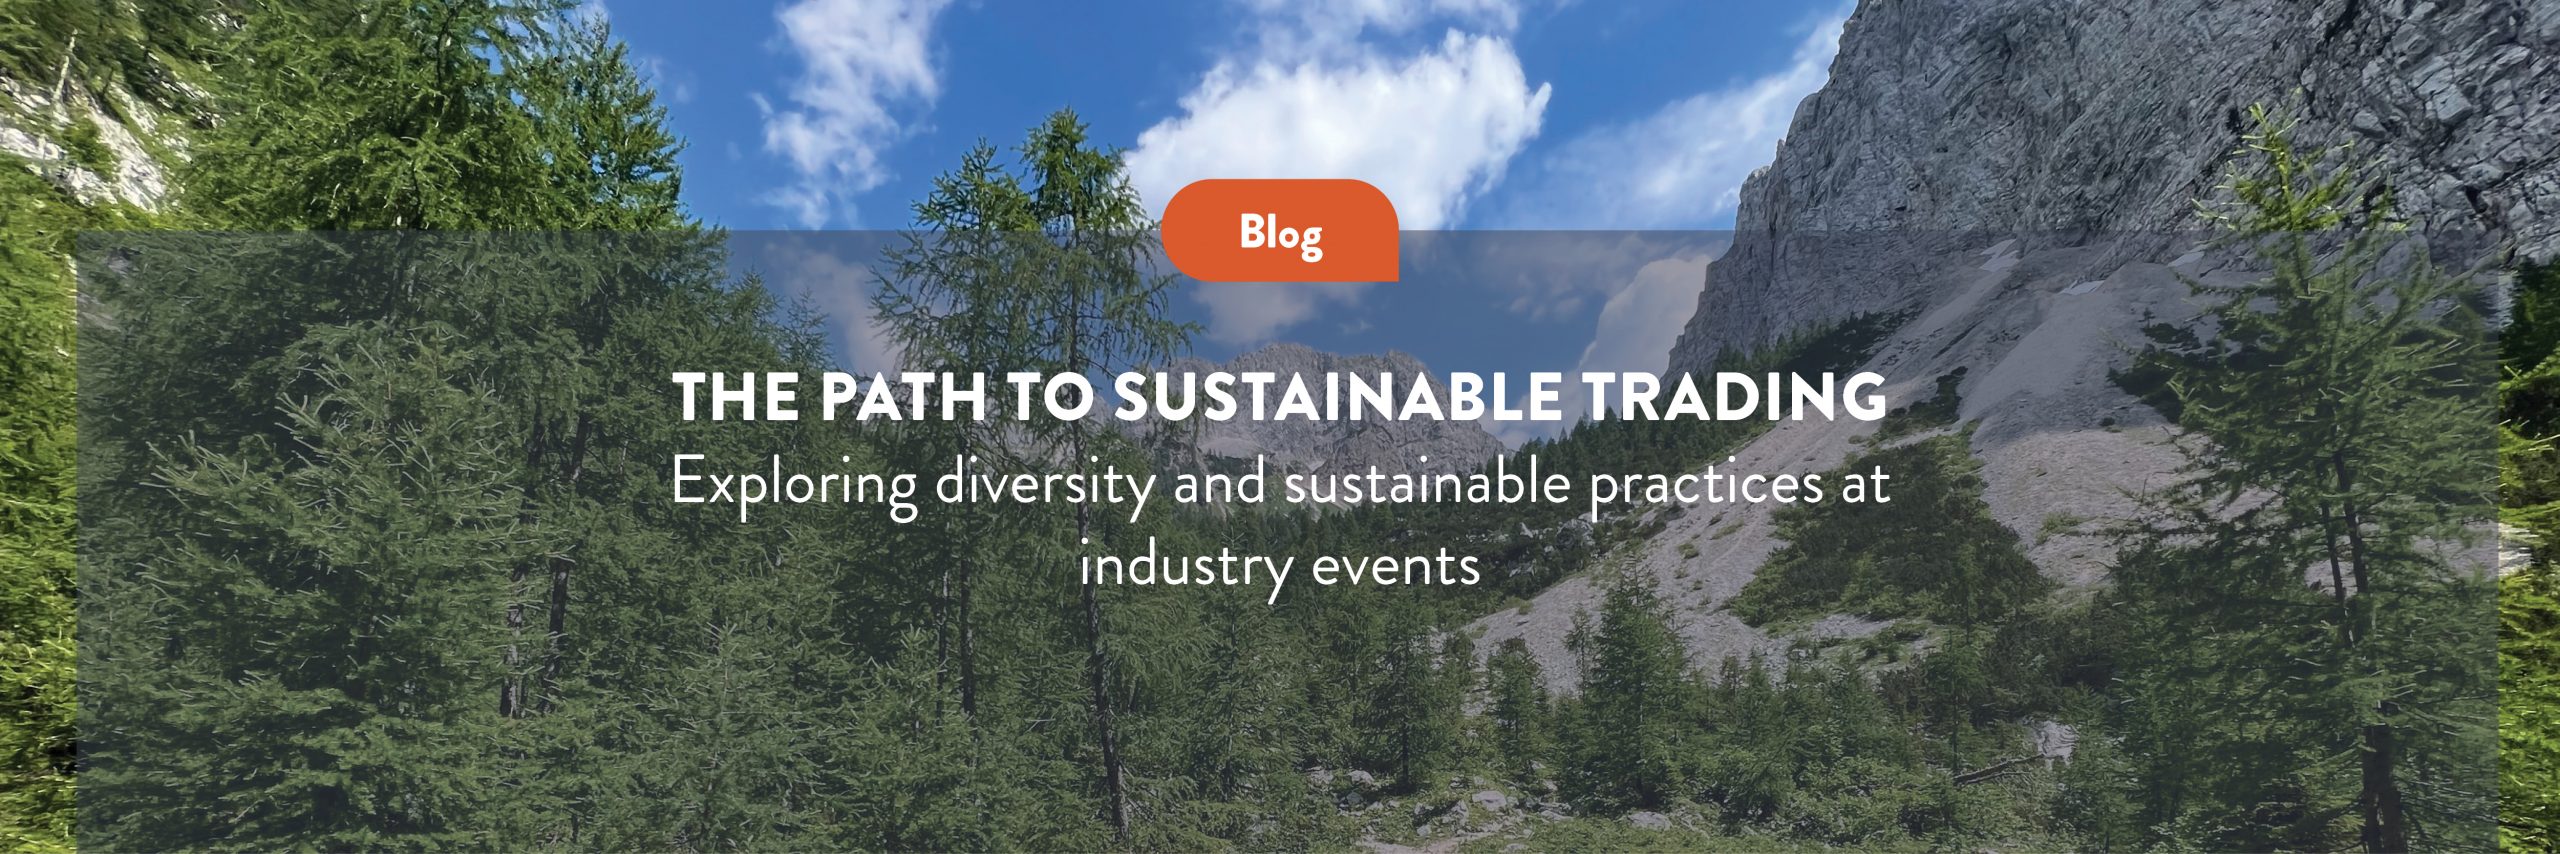 The Path to Sustainable Trading: Exploring diversity and sustainable practices at industry events